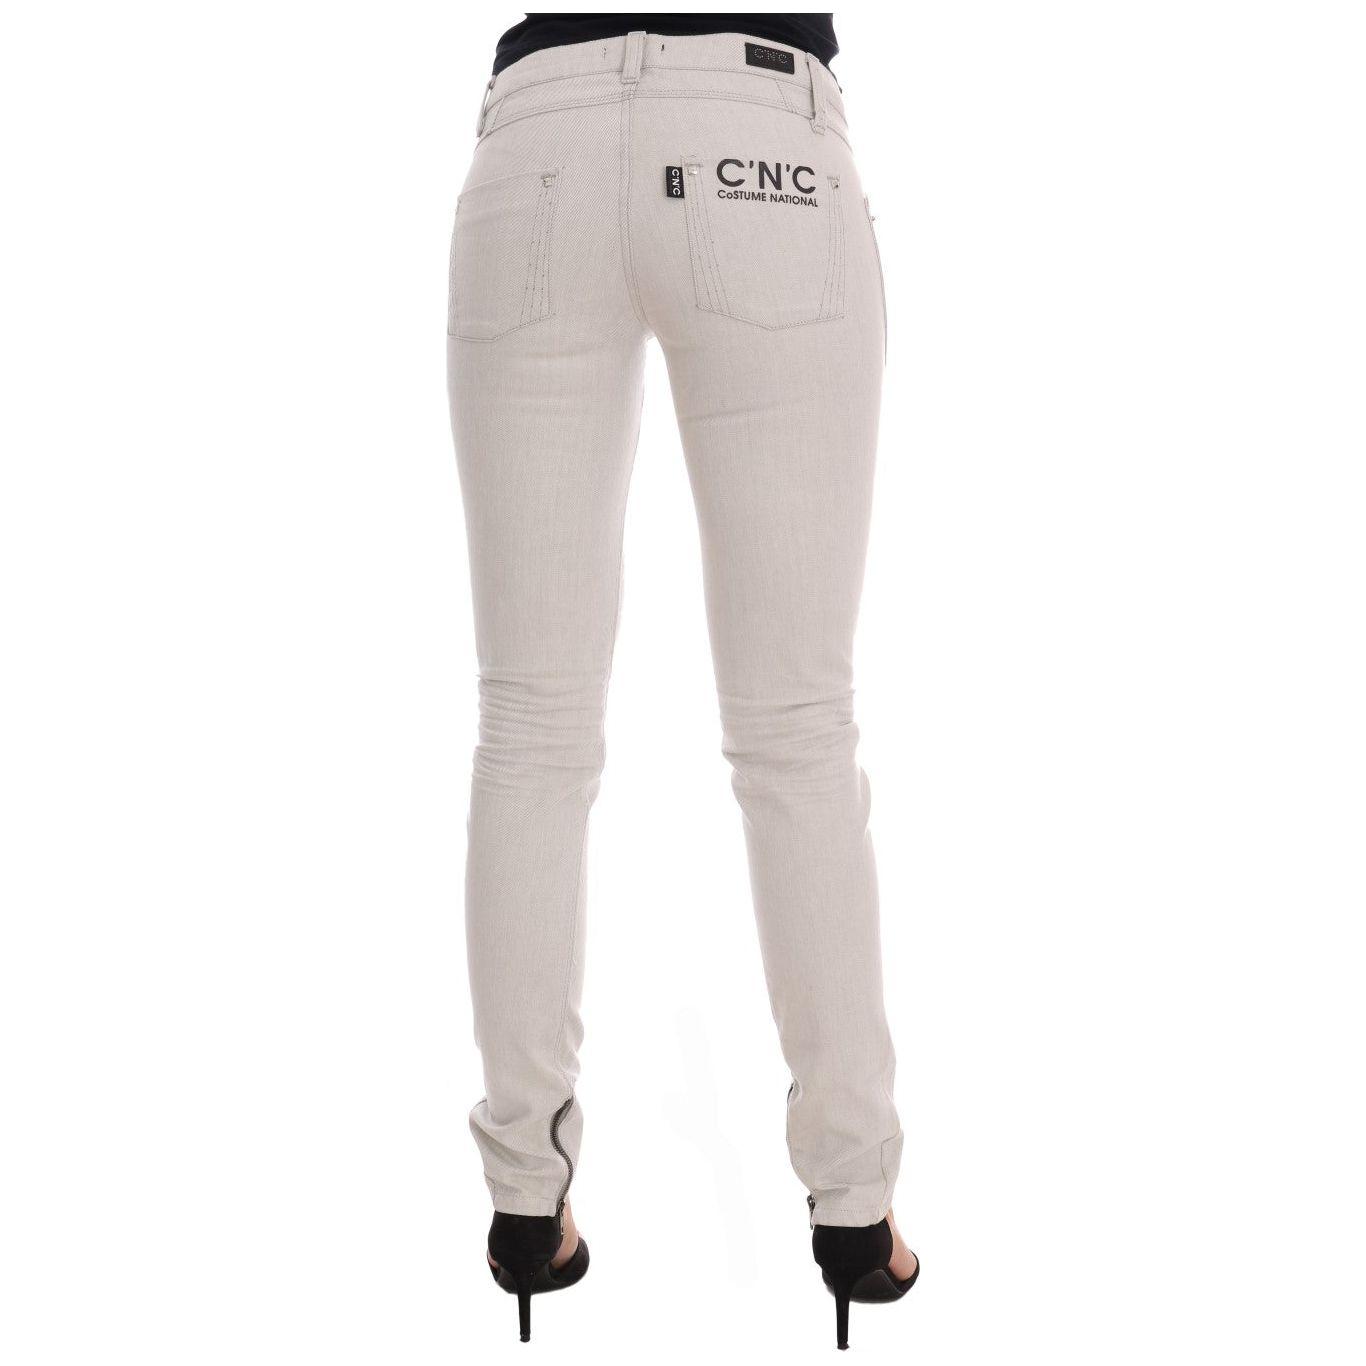 Costume National Chic White Slim-Fit Stretch Jeans white-cotton-stretch-slim-jeans 465909-white-cotton-stretch-slim-jeans-2.jpg